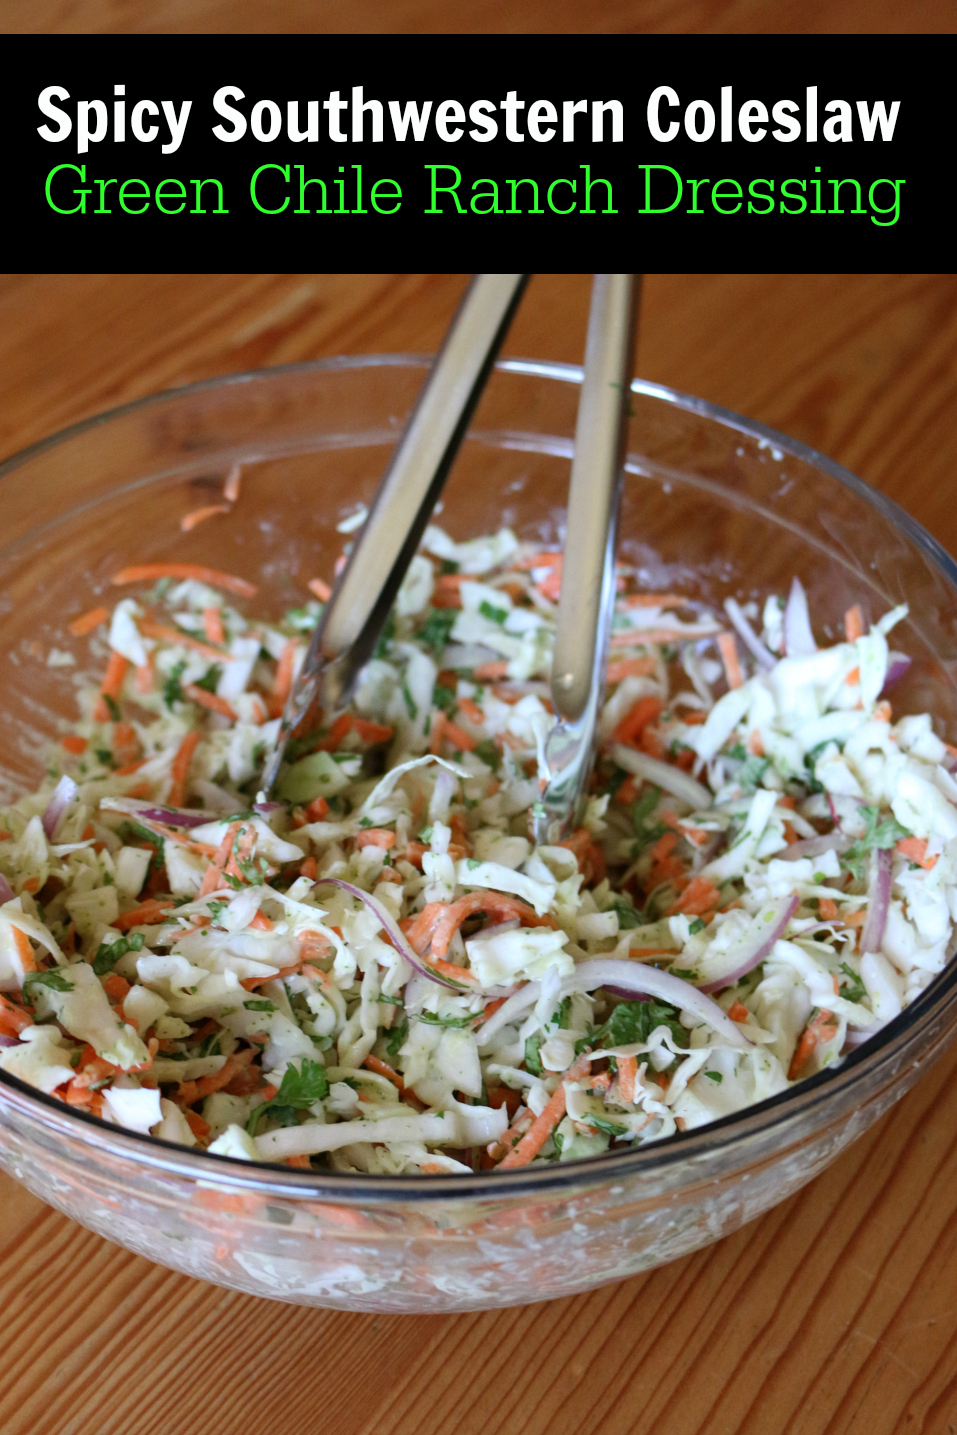 Spicy Southwestern Coleslaw with Green Chile Ranch Dressing CeceliasGoodStuff.com | Good Food for Good People